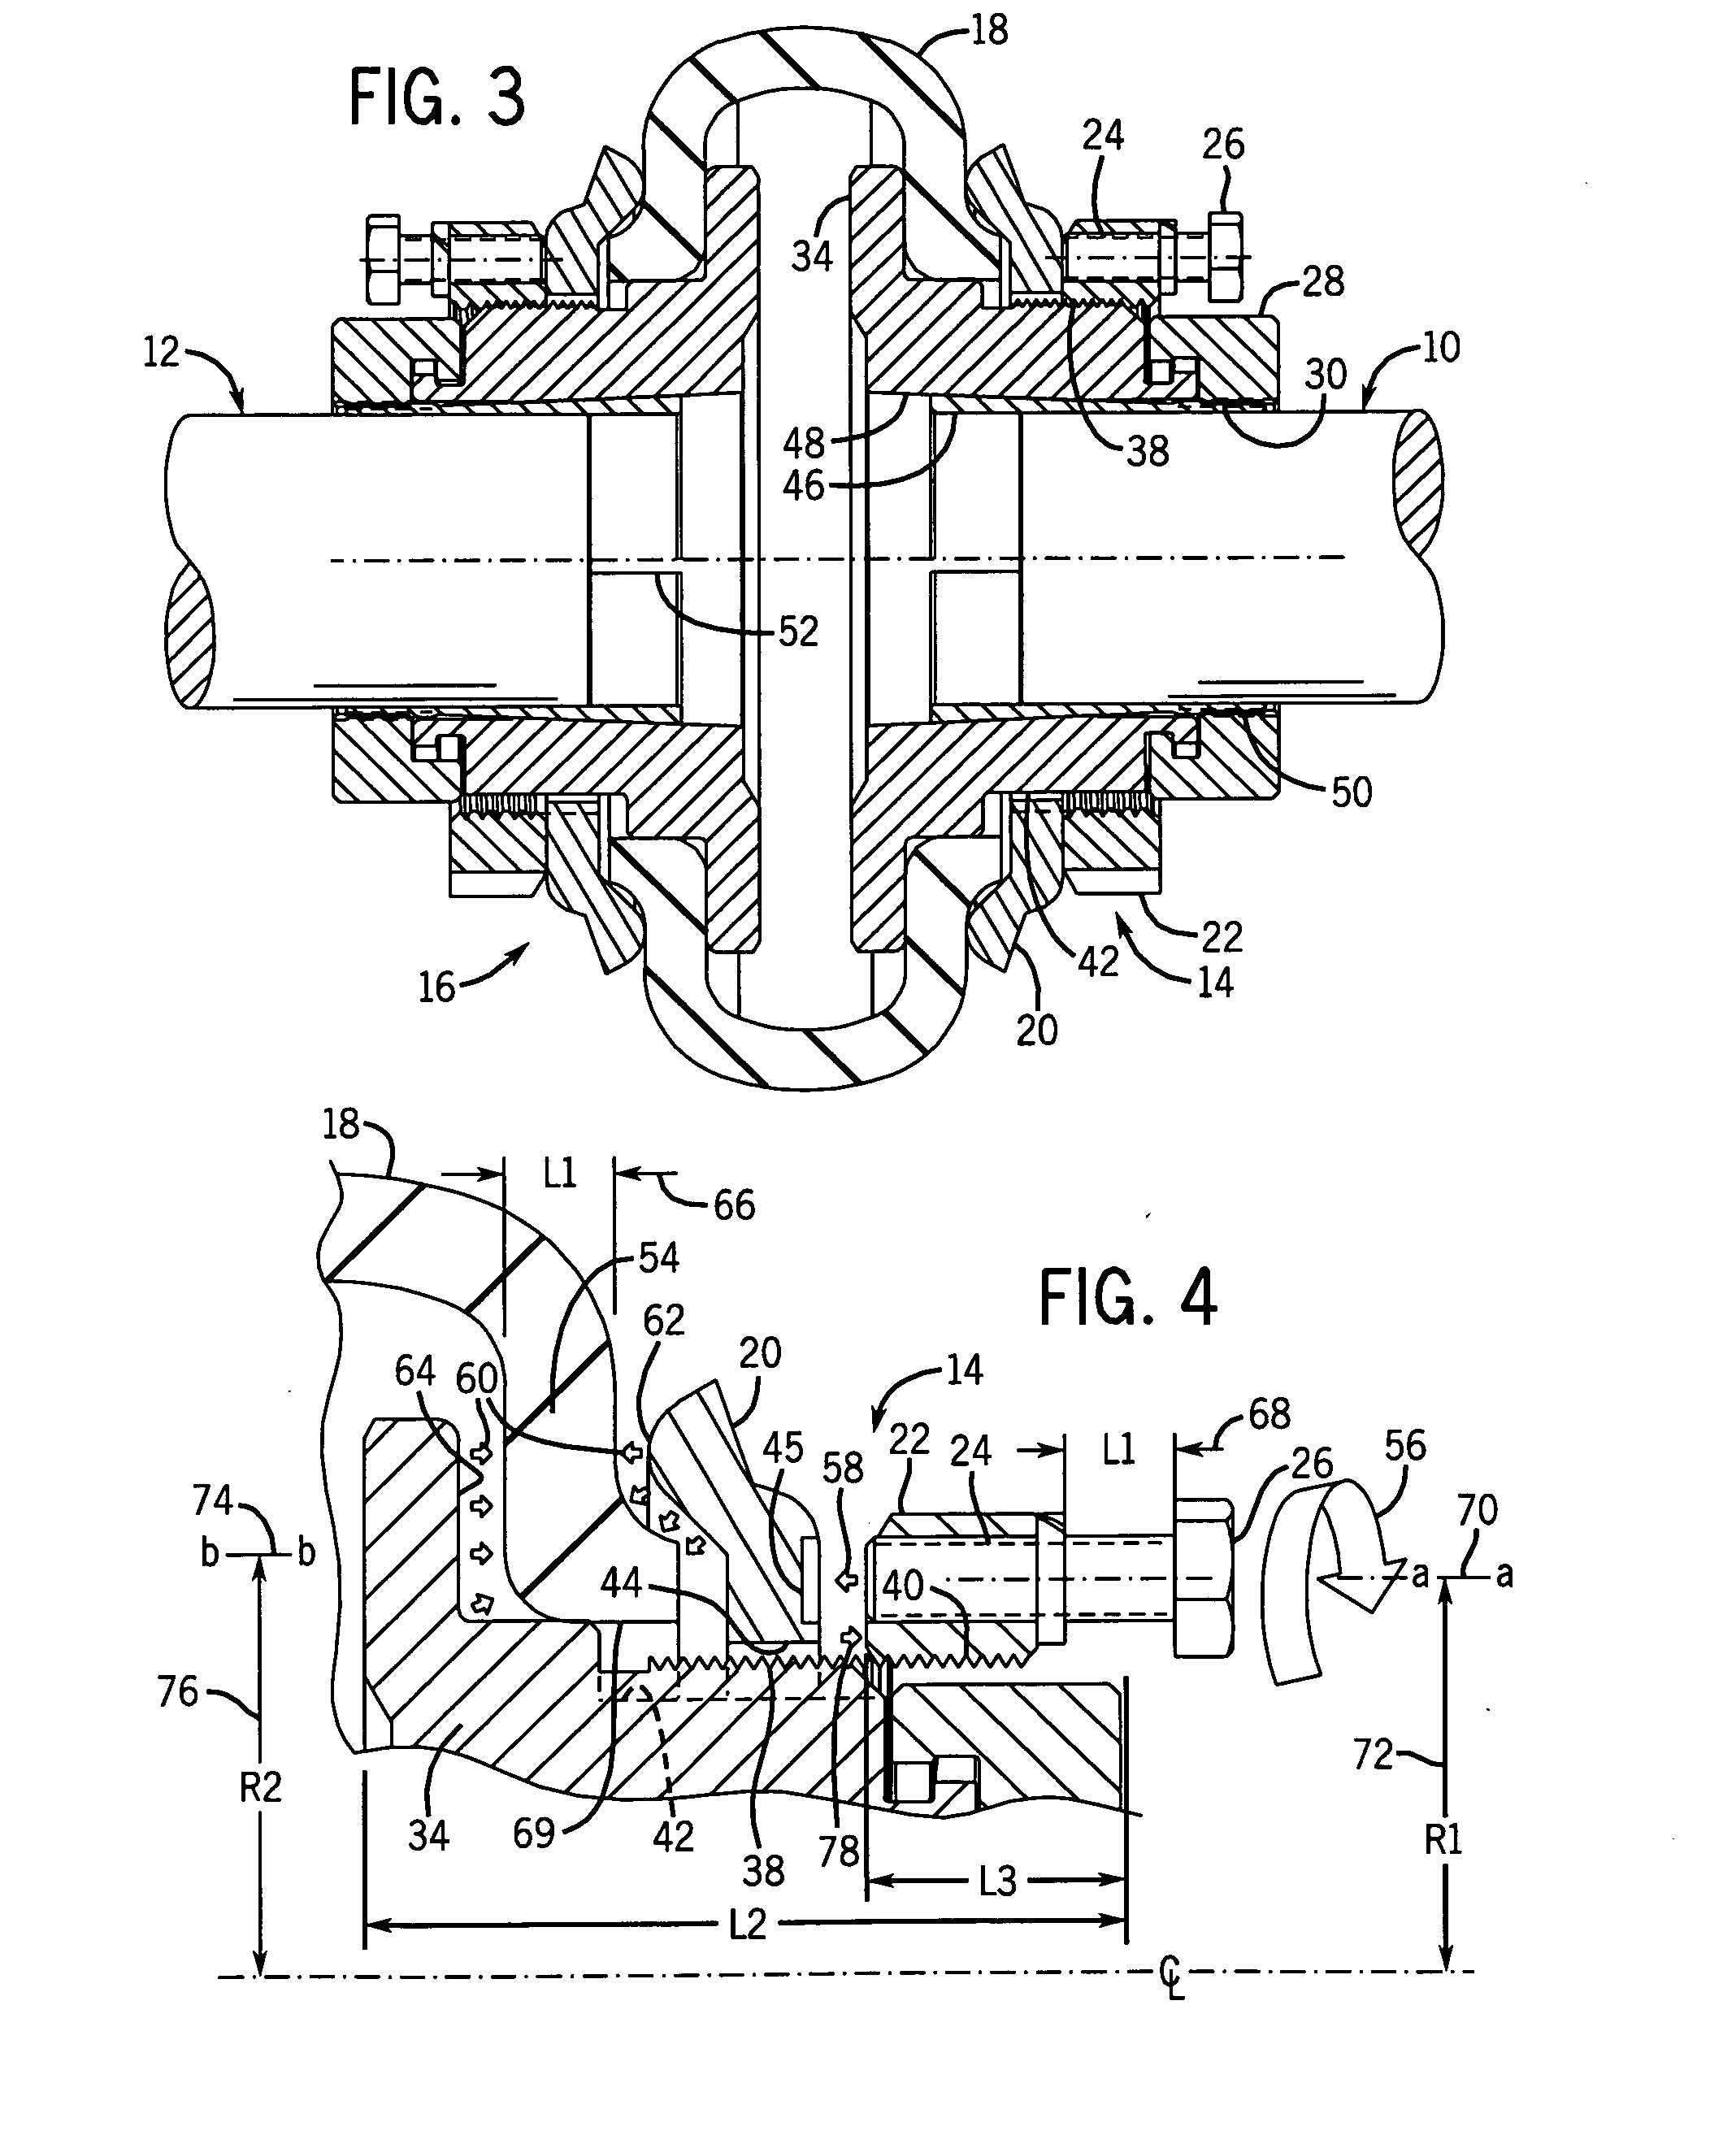 Flexible shaft coupling system and method